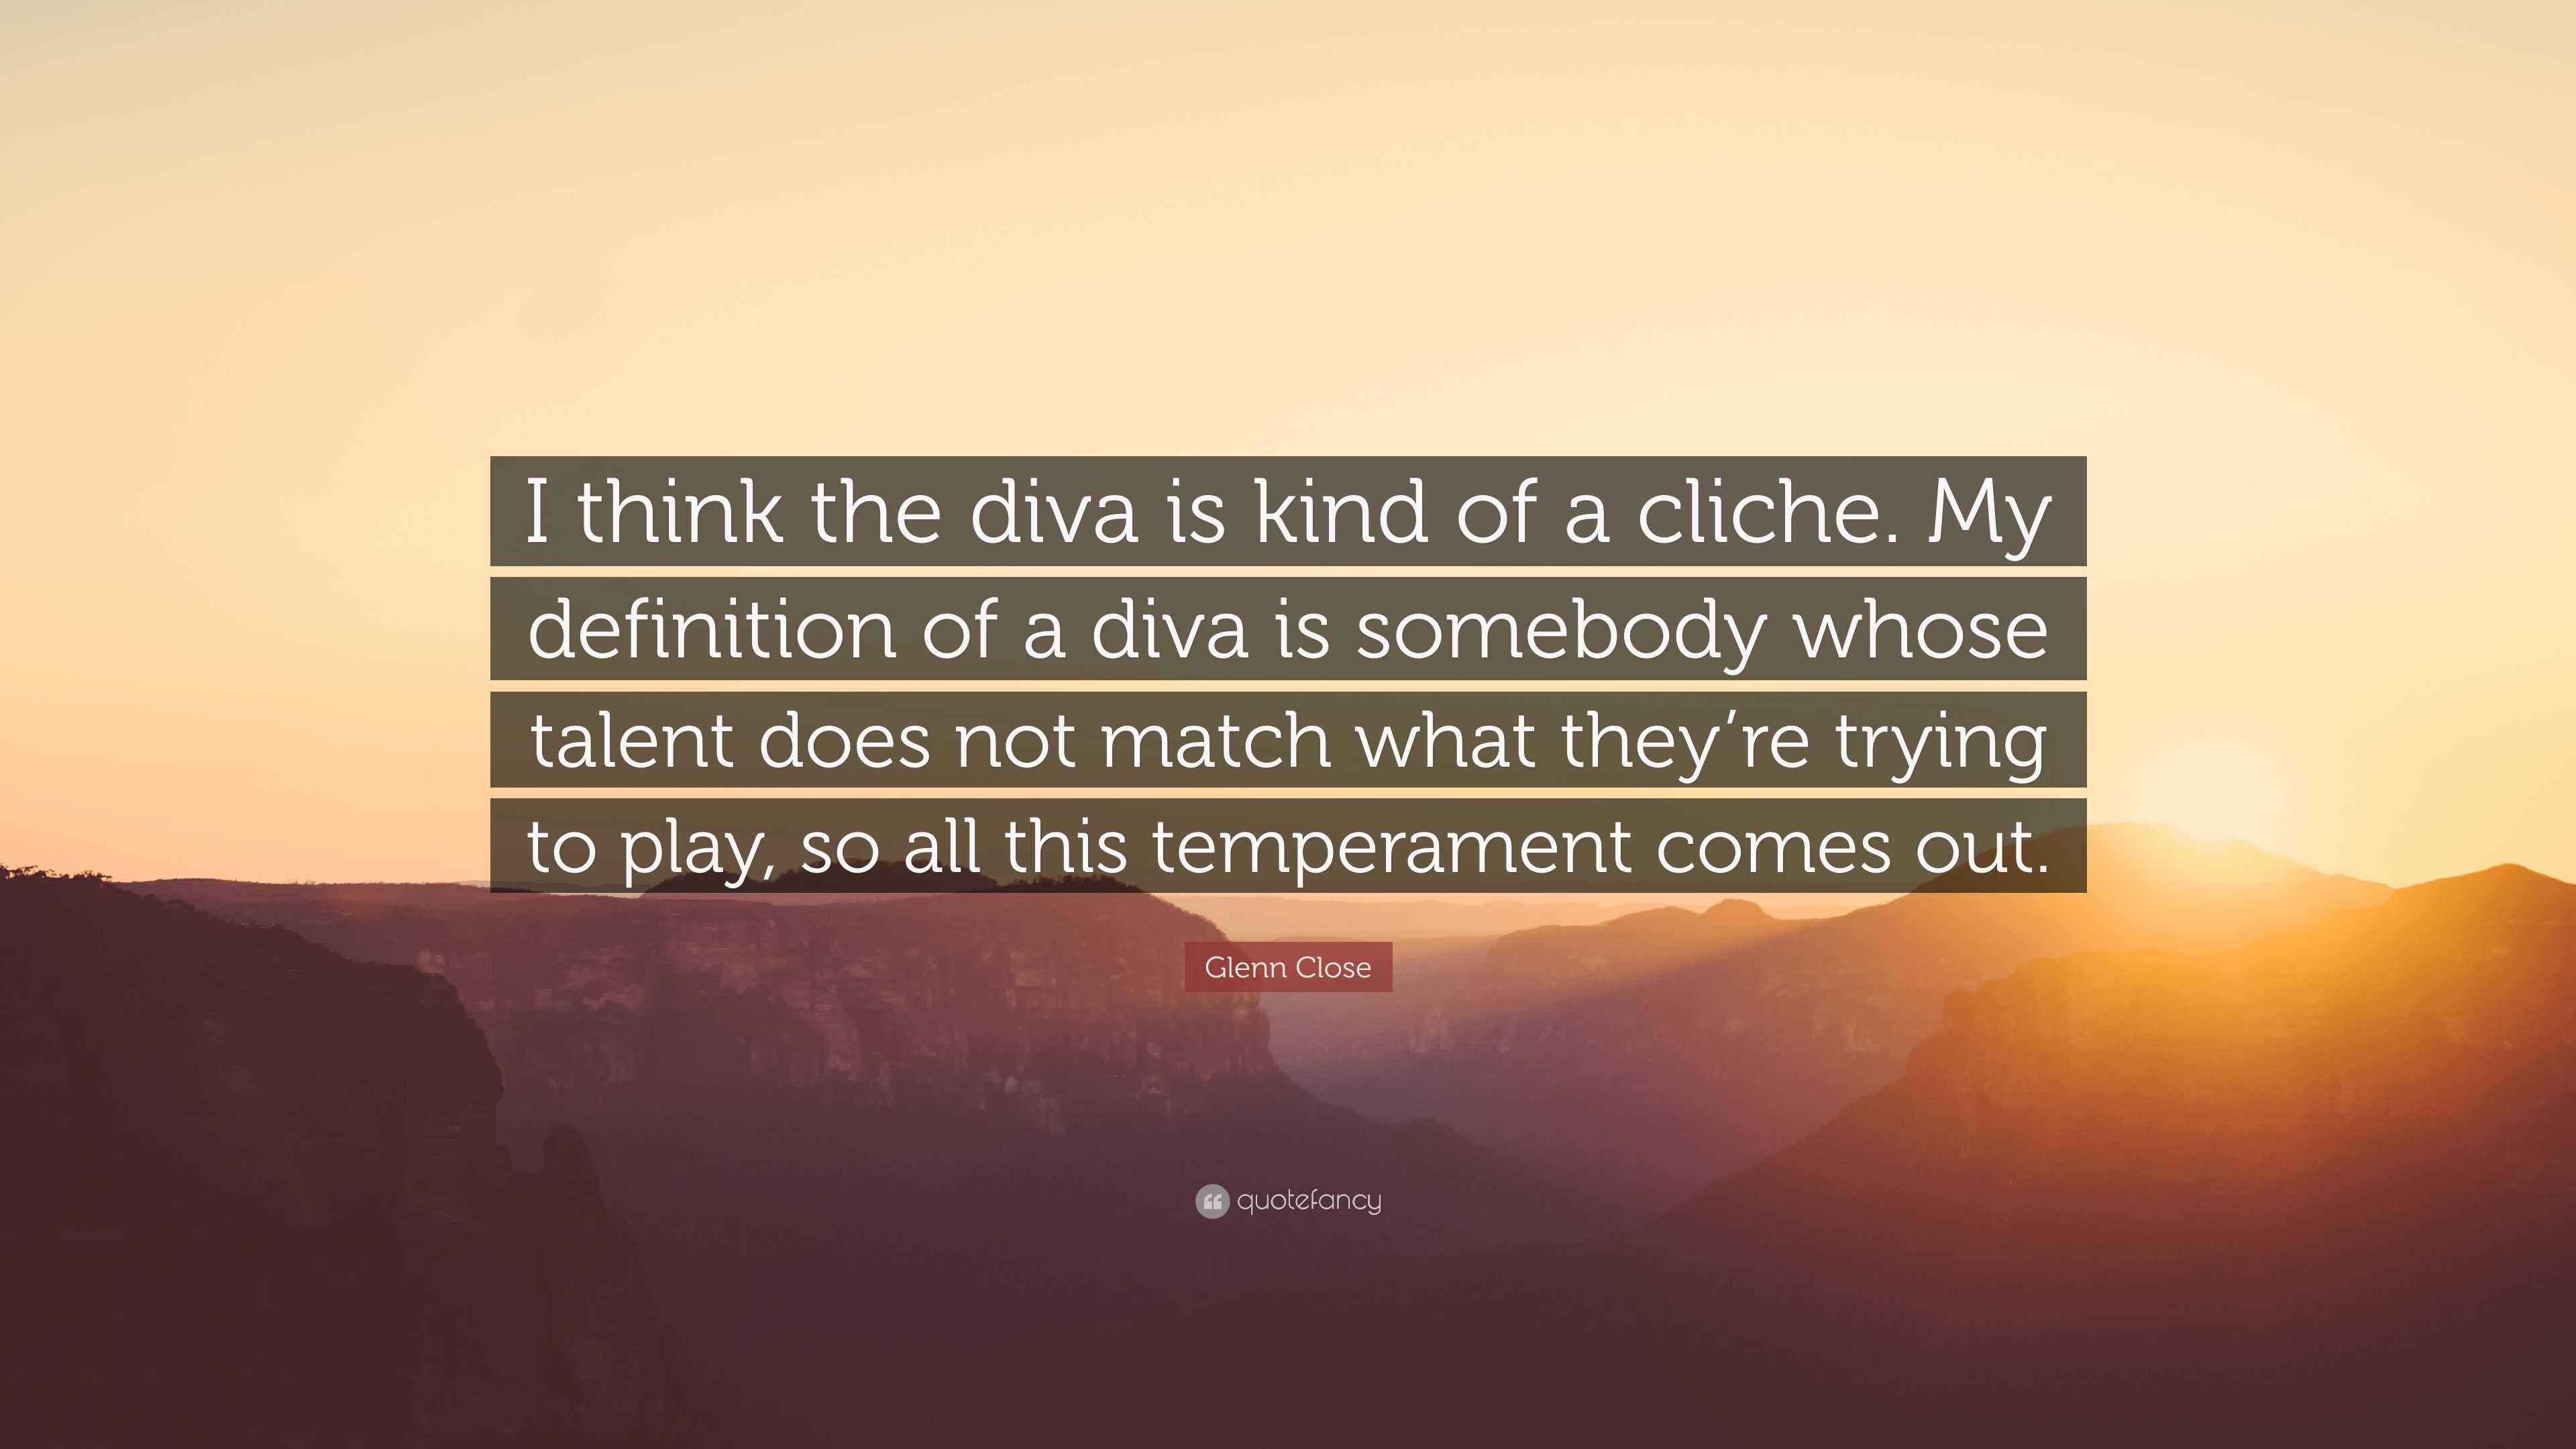 Glenn Close Quote I Think The Diva Is Kind Of A Cliche My Definition Of A Diva Is Somebody Whose Talent Does Not Match What They Re Tryin